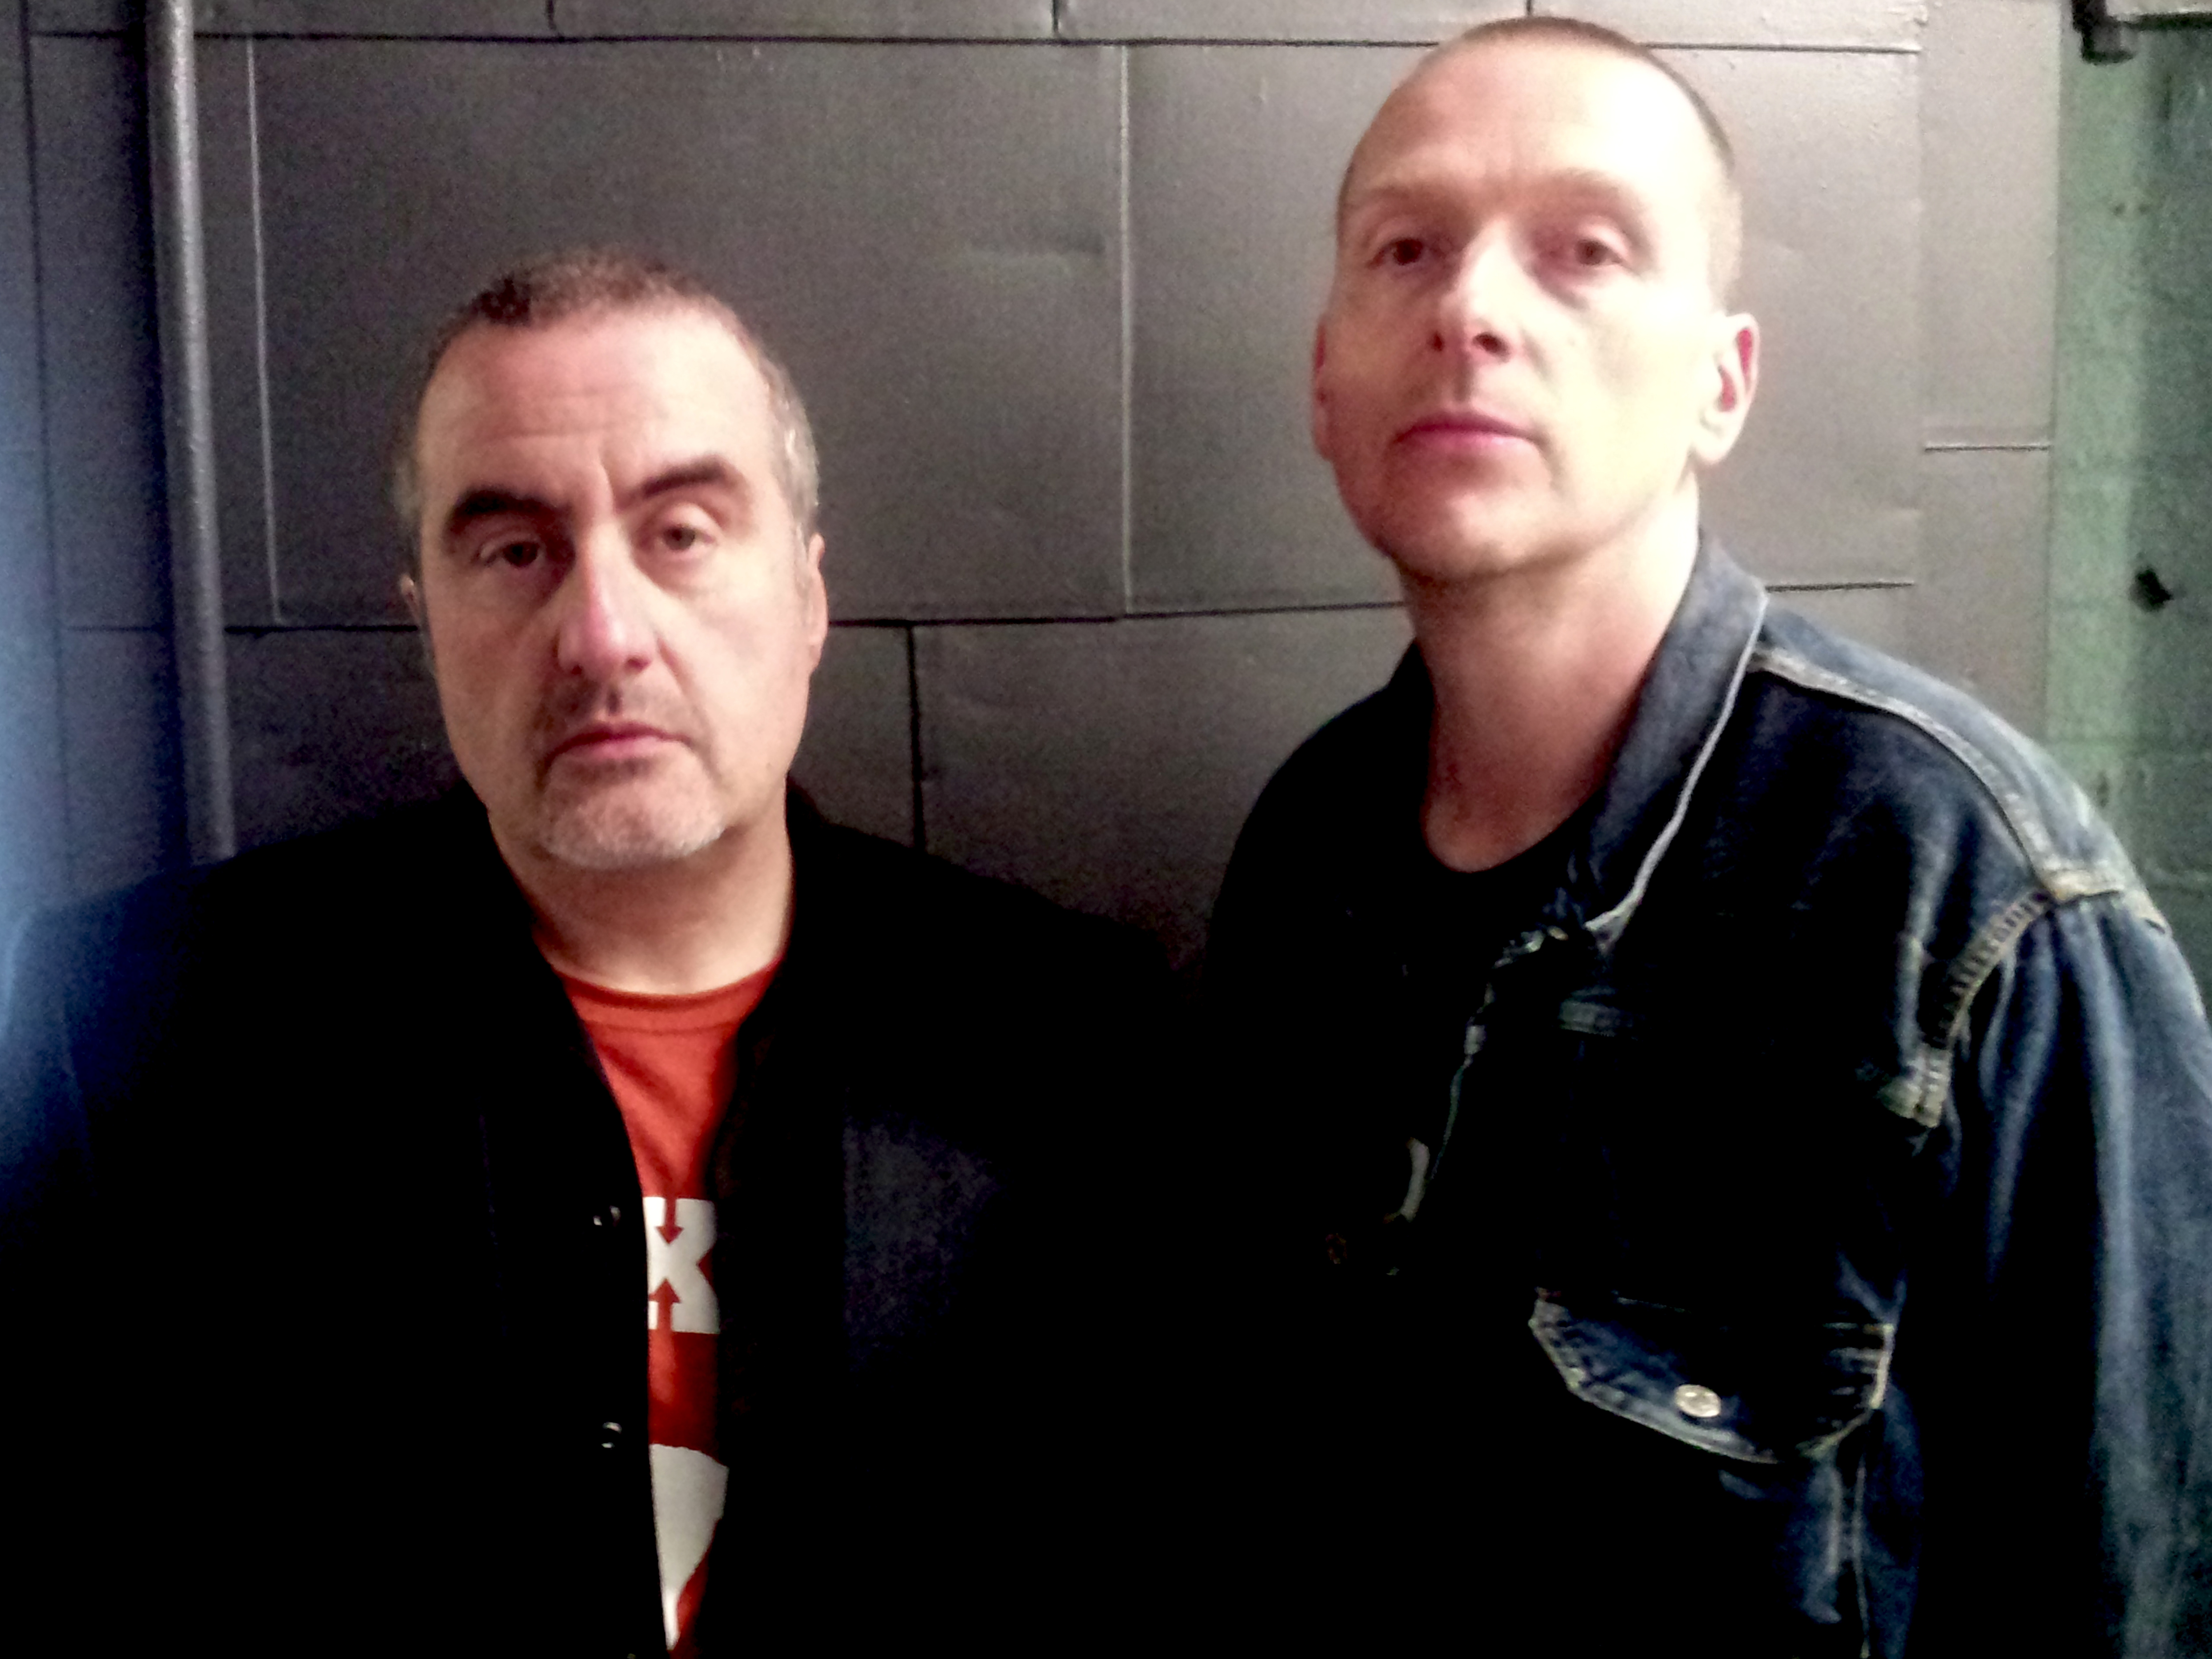 Godflesh's new album, A World Lit Only By Fire, comes out Oct. 7.